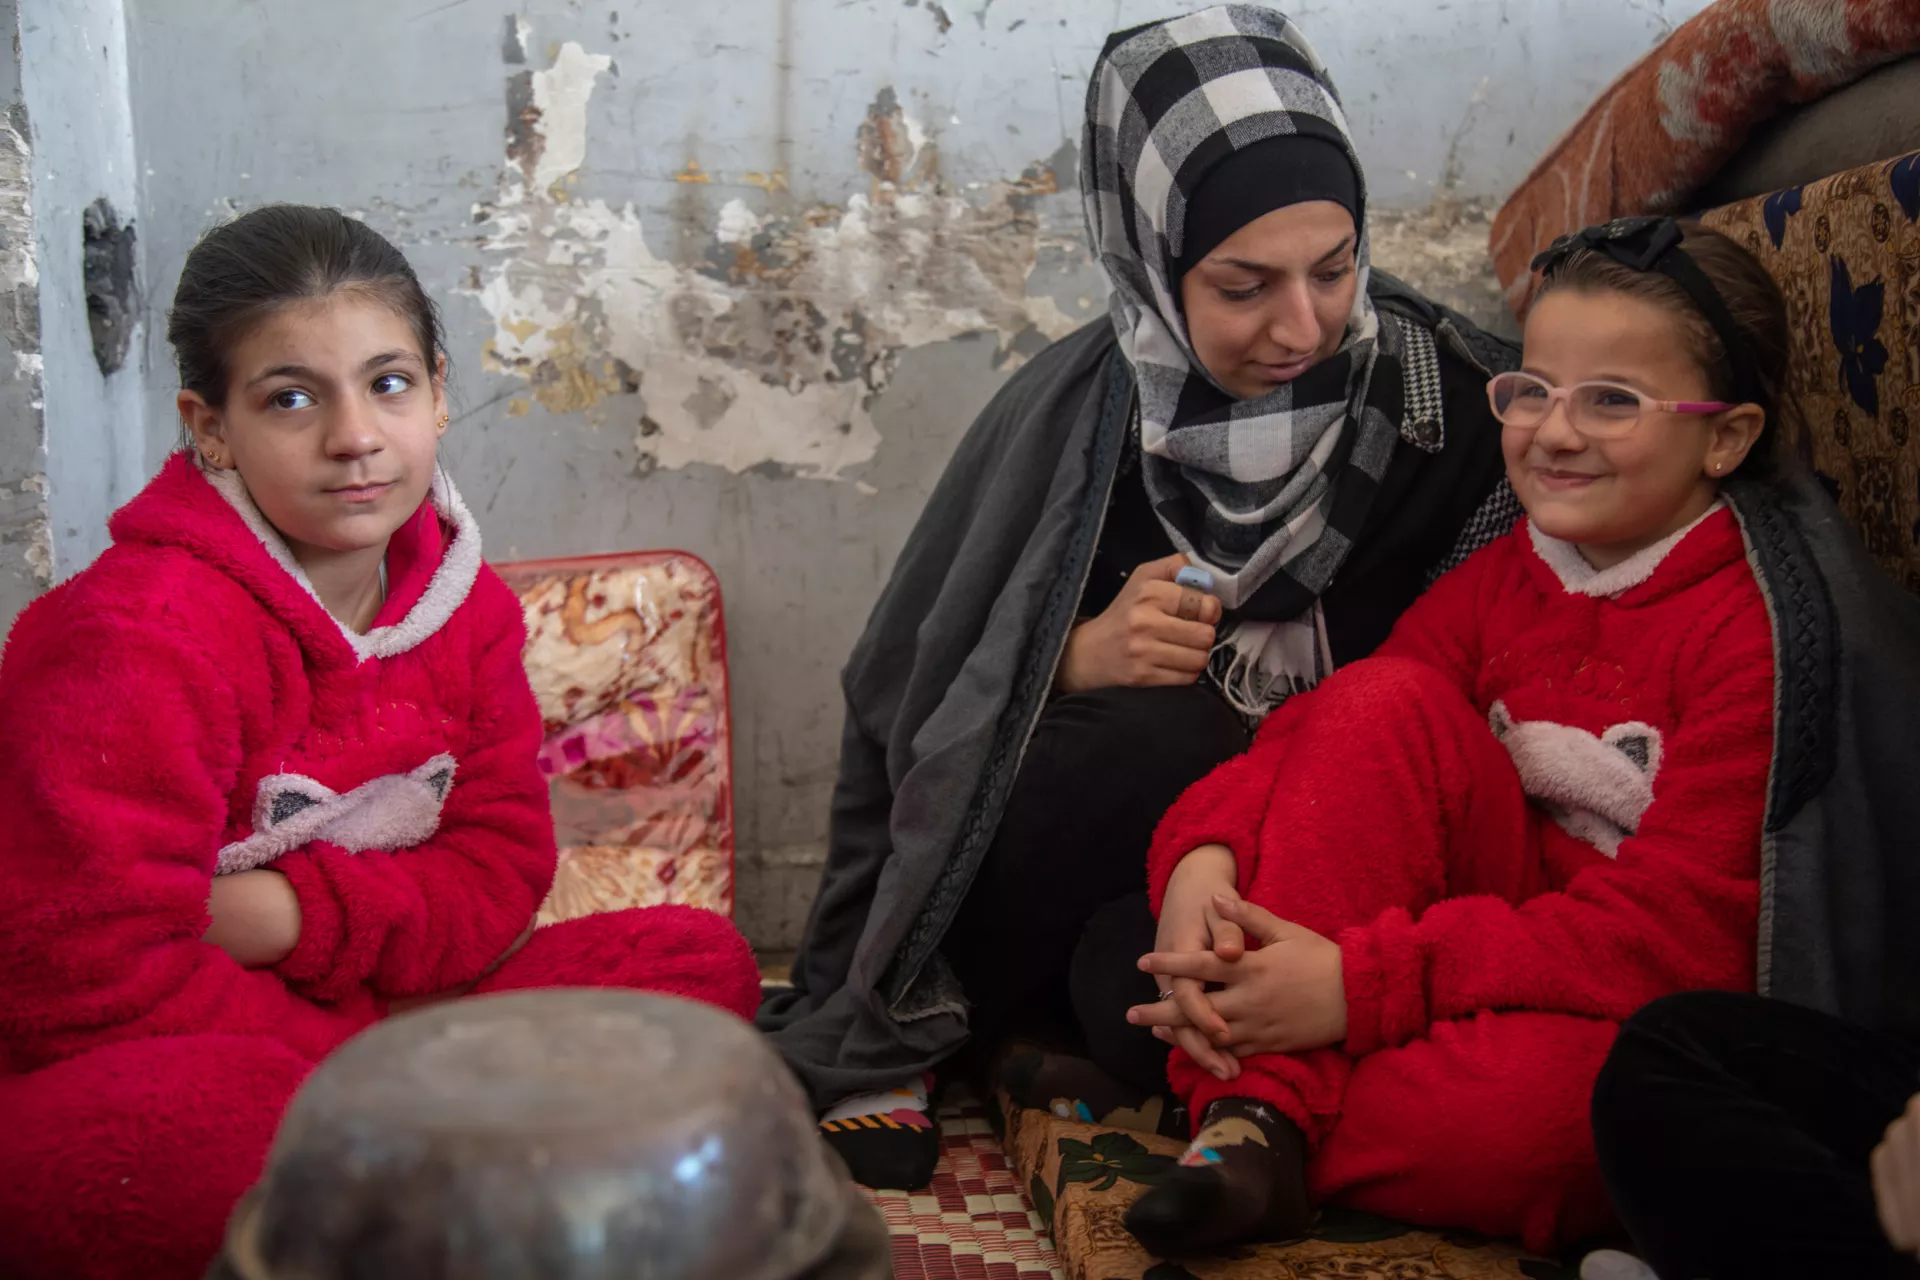 10-year-old Judy is staying with her mother and sister in a temporary shelter located in Aleppo city.